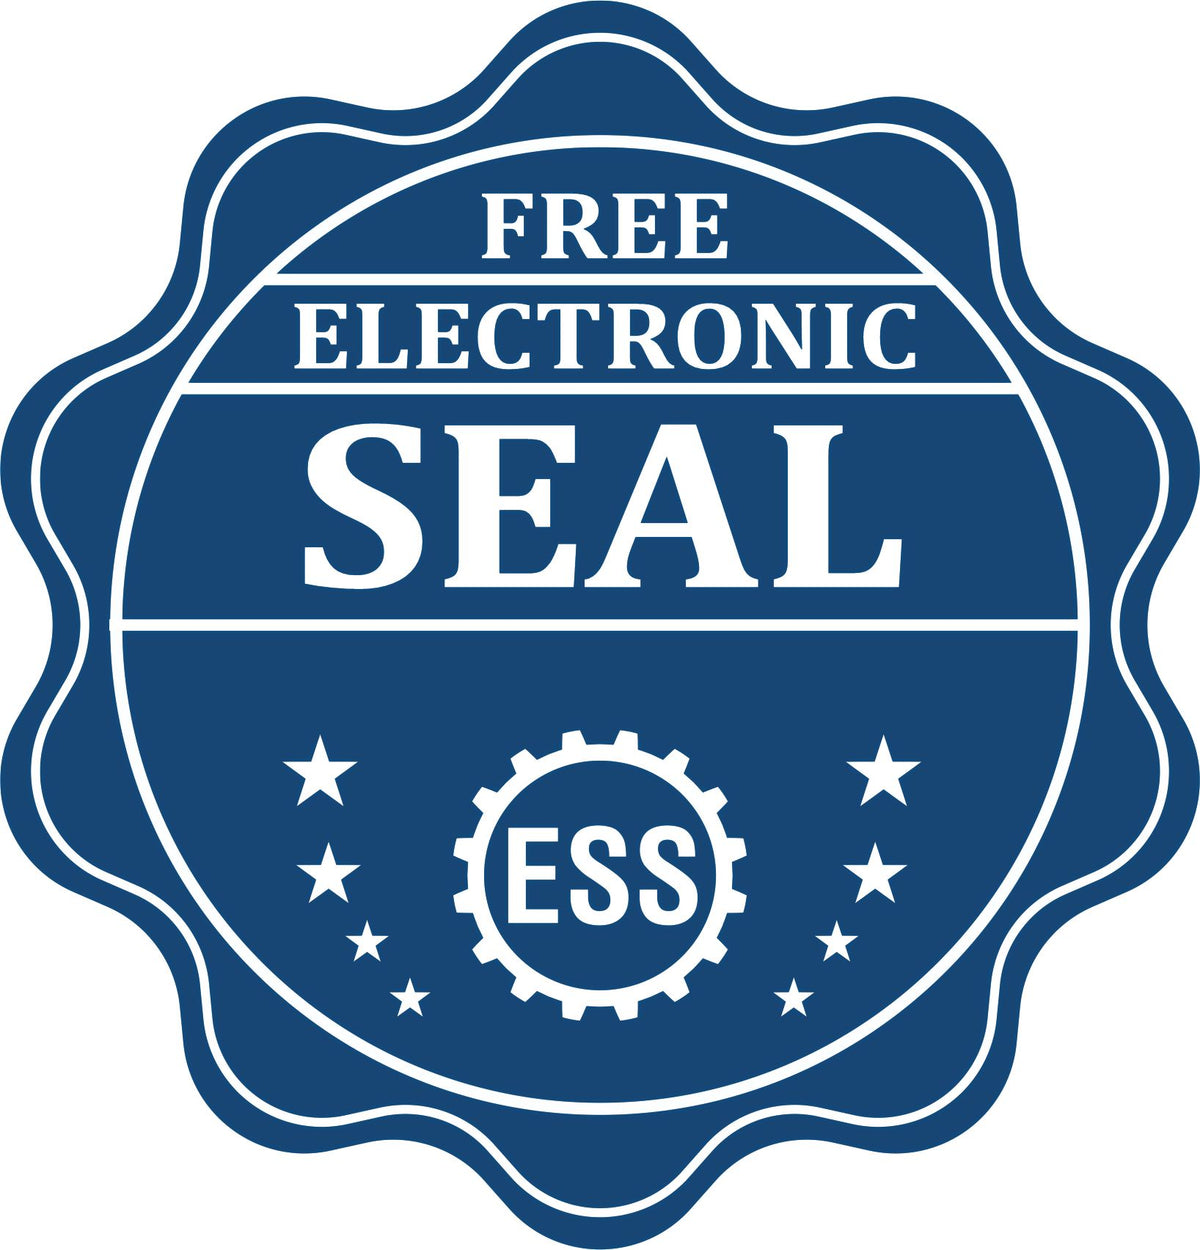 A badge showing a free electronic seal for the Slim Pre-Inked District of Columbia Professional Engineer Seal Stamp with stars and the ESS gear on the emblem.